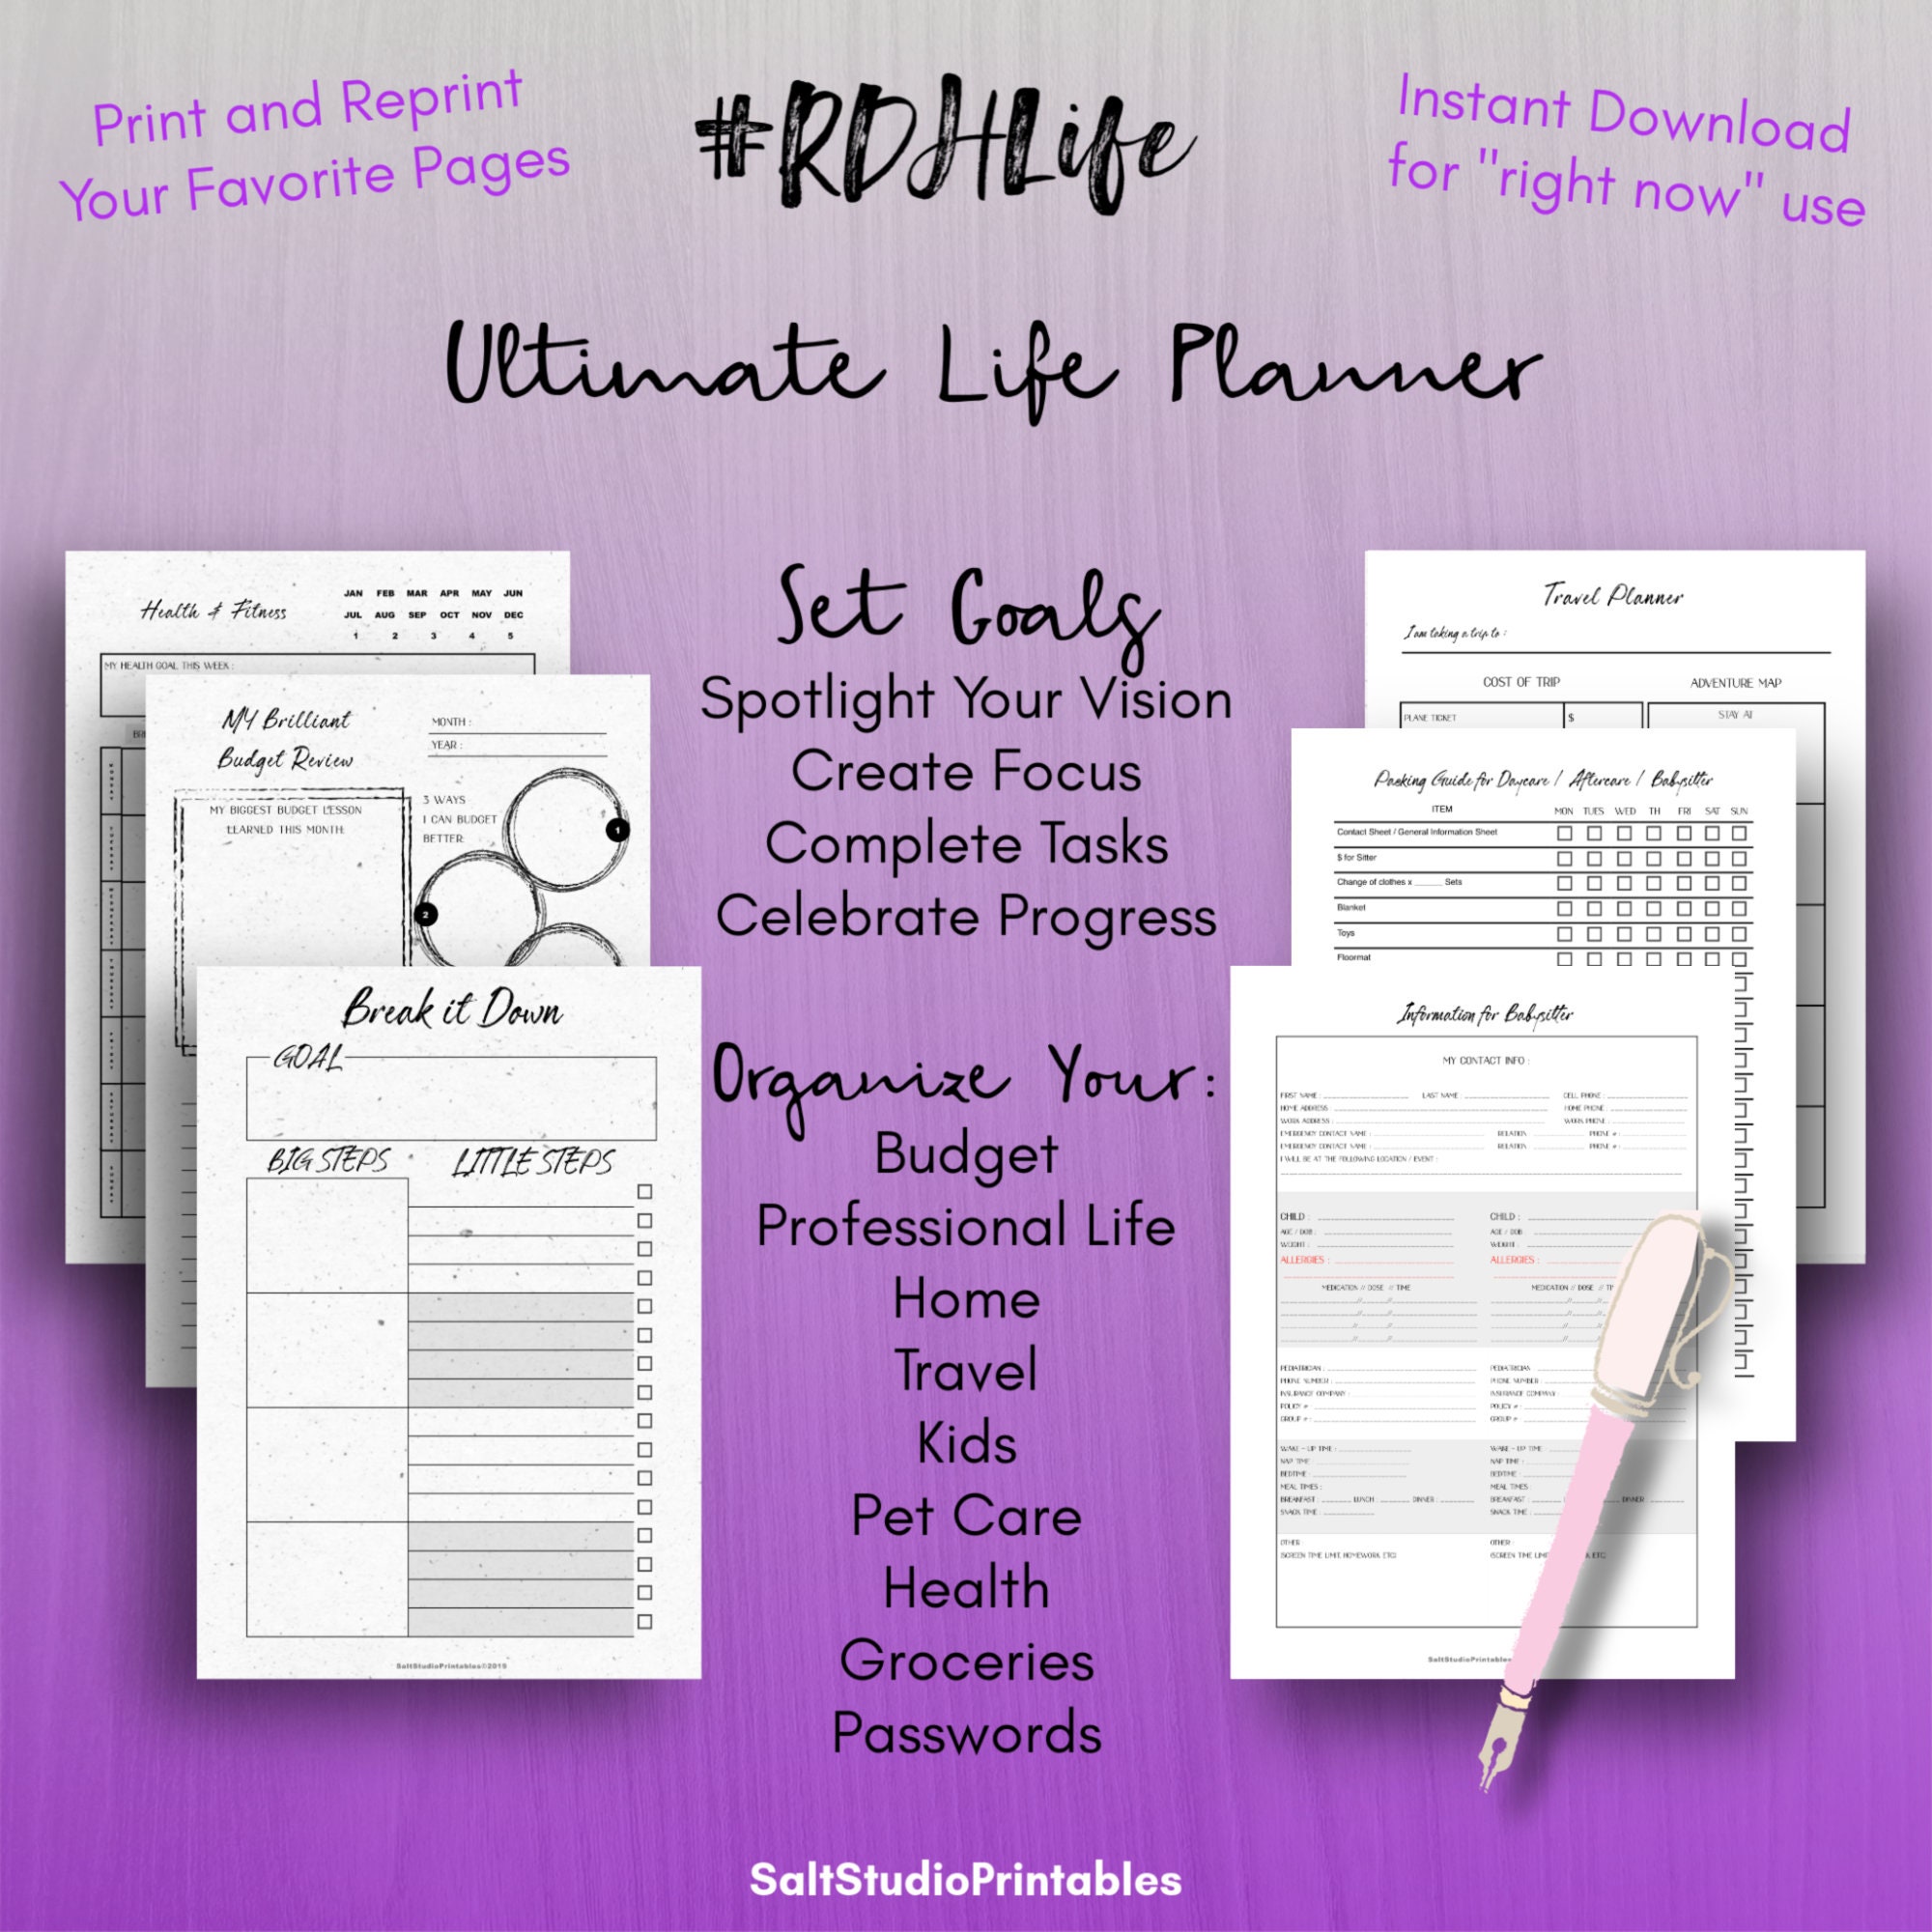 PERSONALIZED Printable Ultimate Life Planner for Dental - Etsy